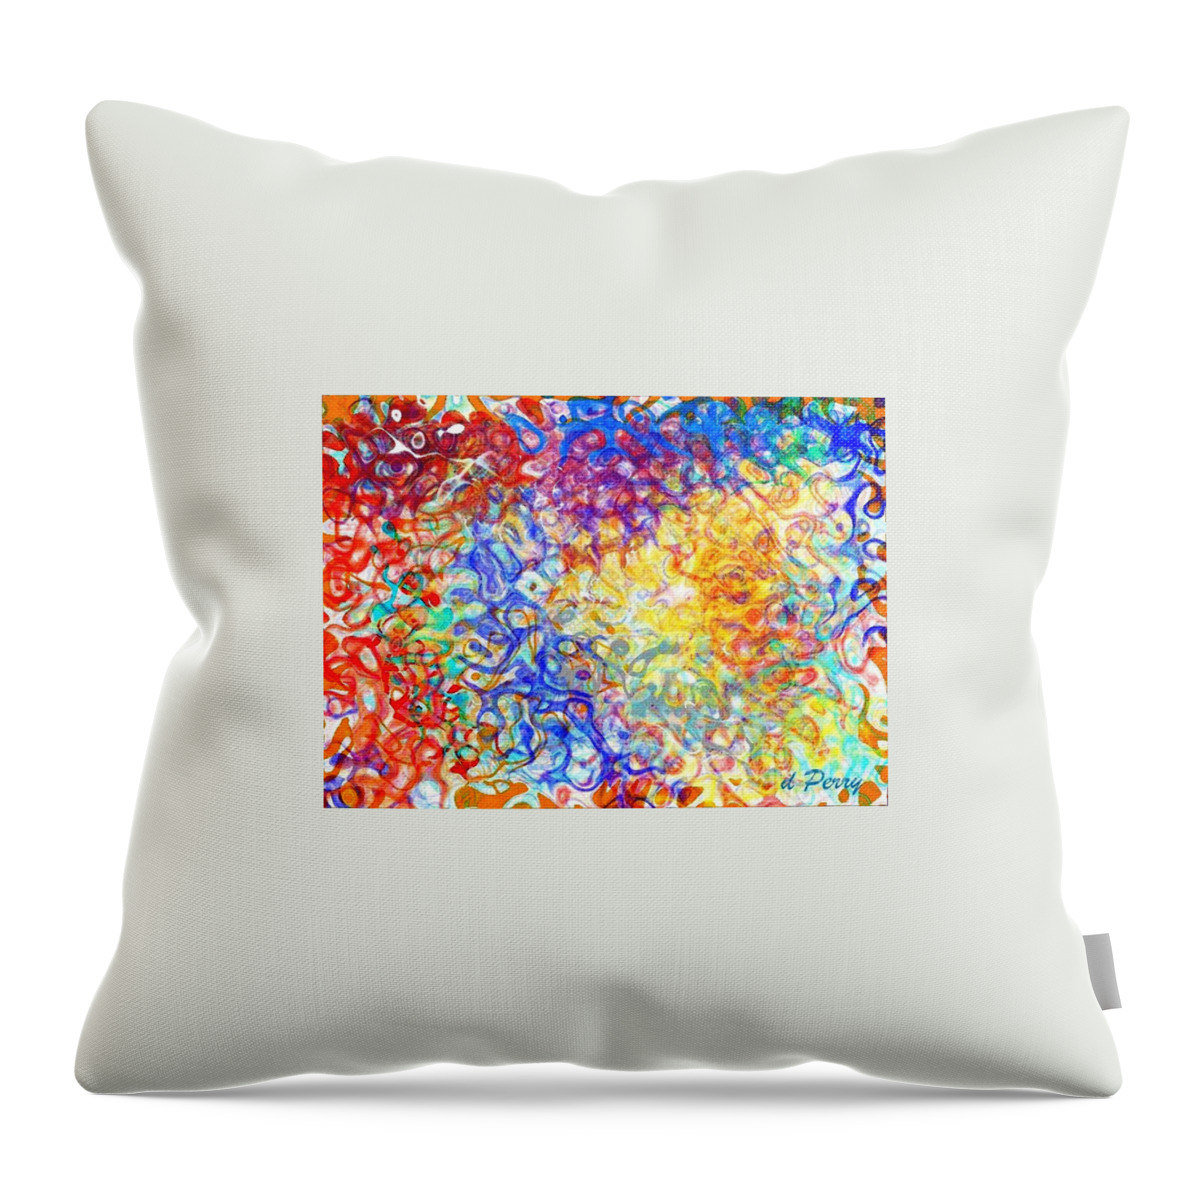 Abstract Art Throw Pillow featuring the digital art Complexities 5 by D Perry